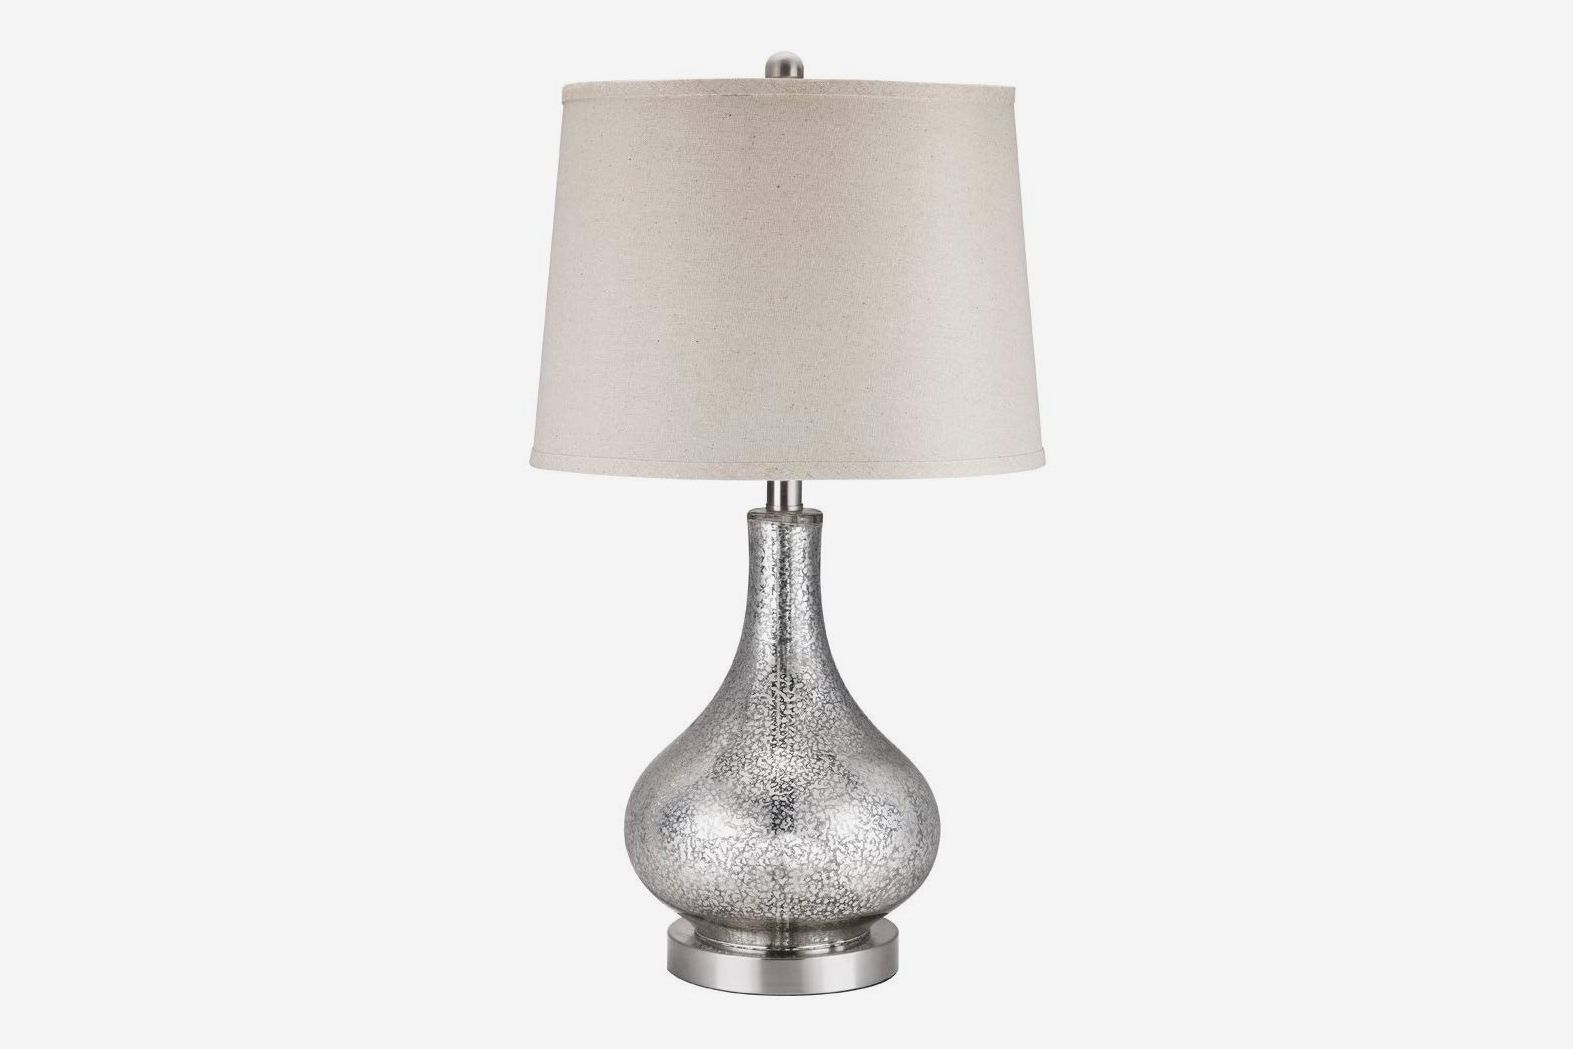 22 Best Bedside Lamps 2021 The Strategist, Bedside Table Lamps For Reading